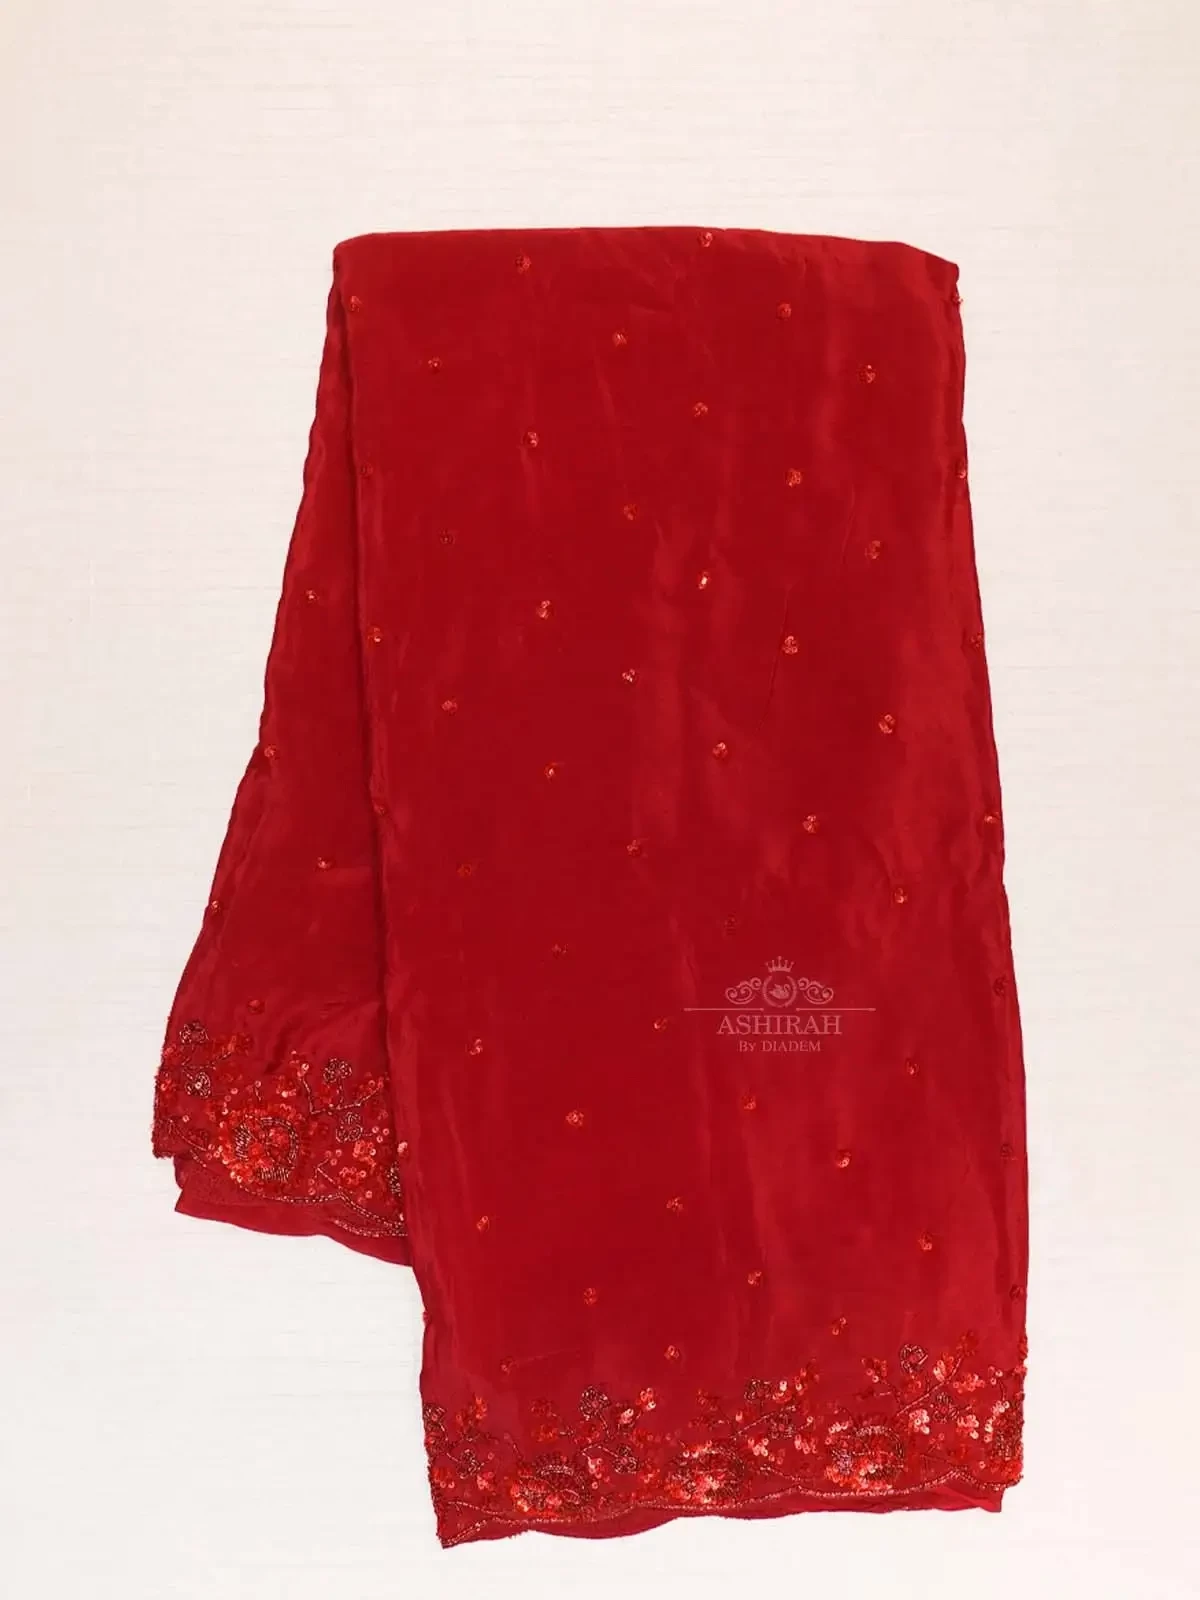 Red Organza Silk Saree Embellished with Floral Embroidery Border